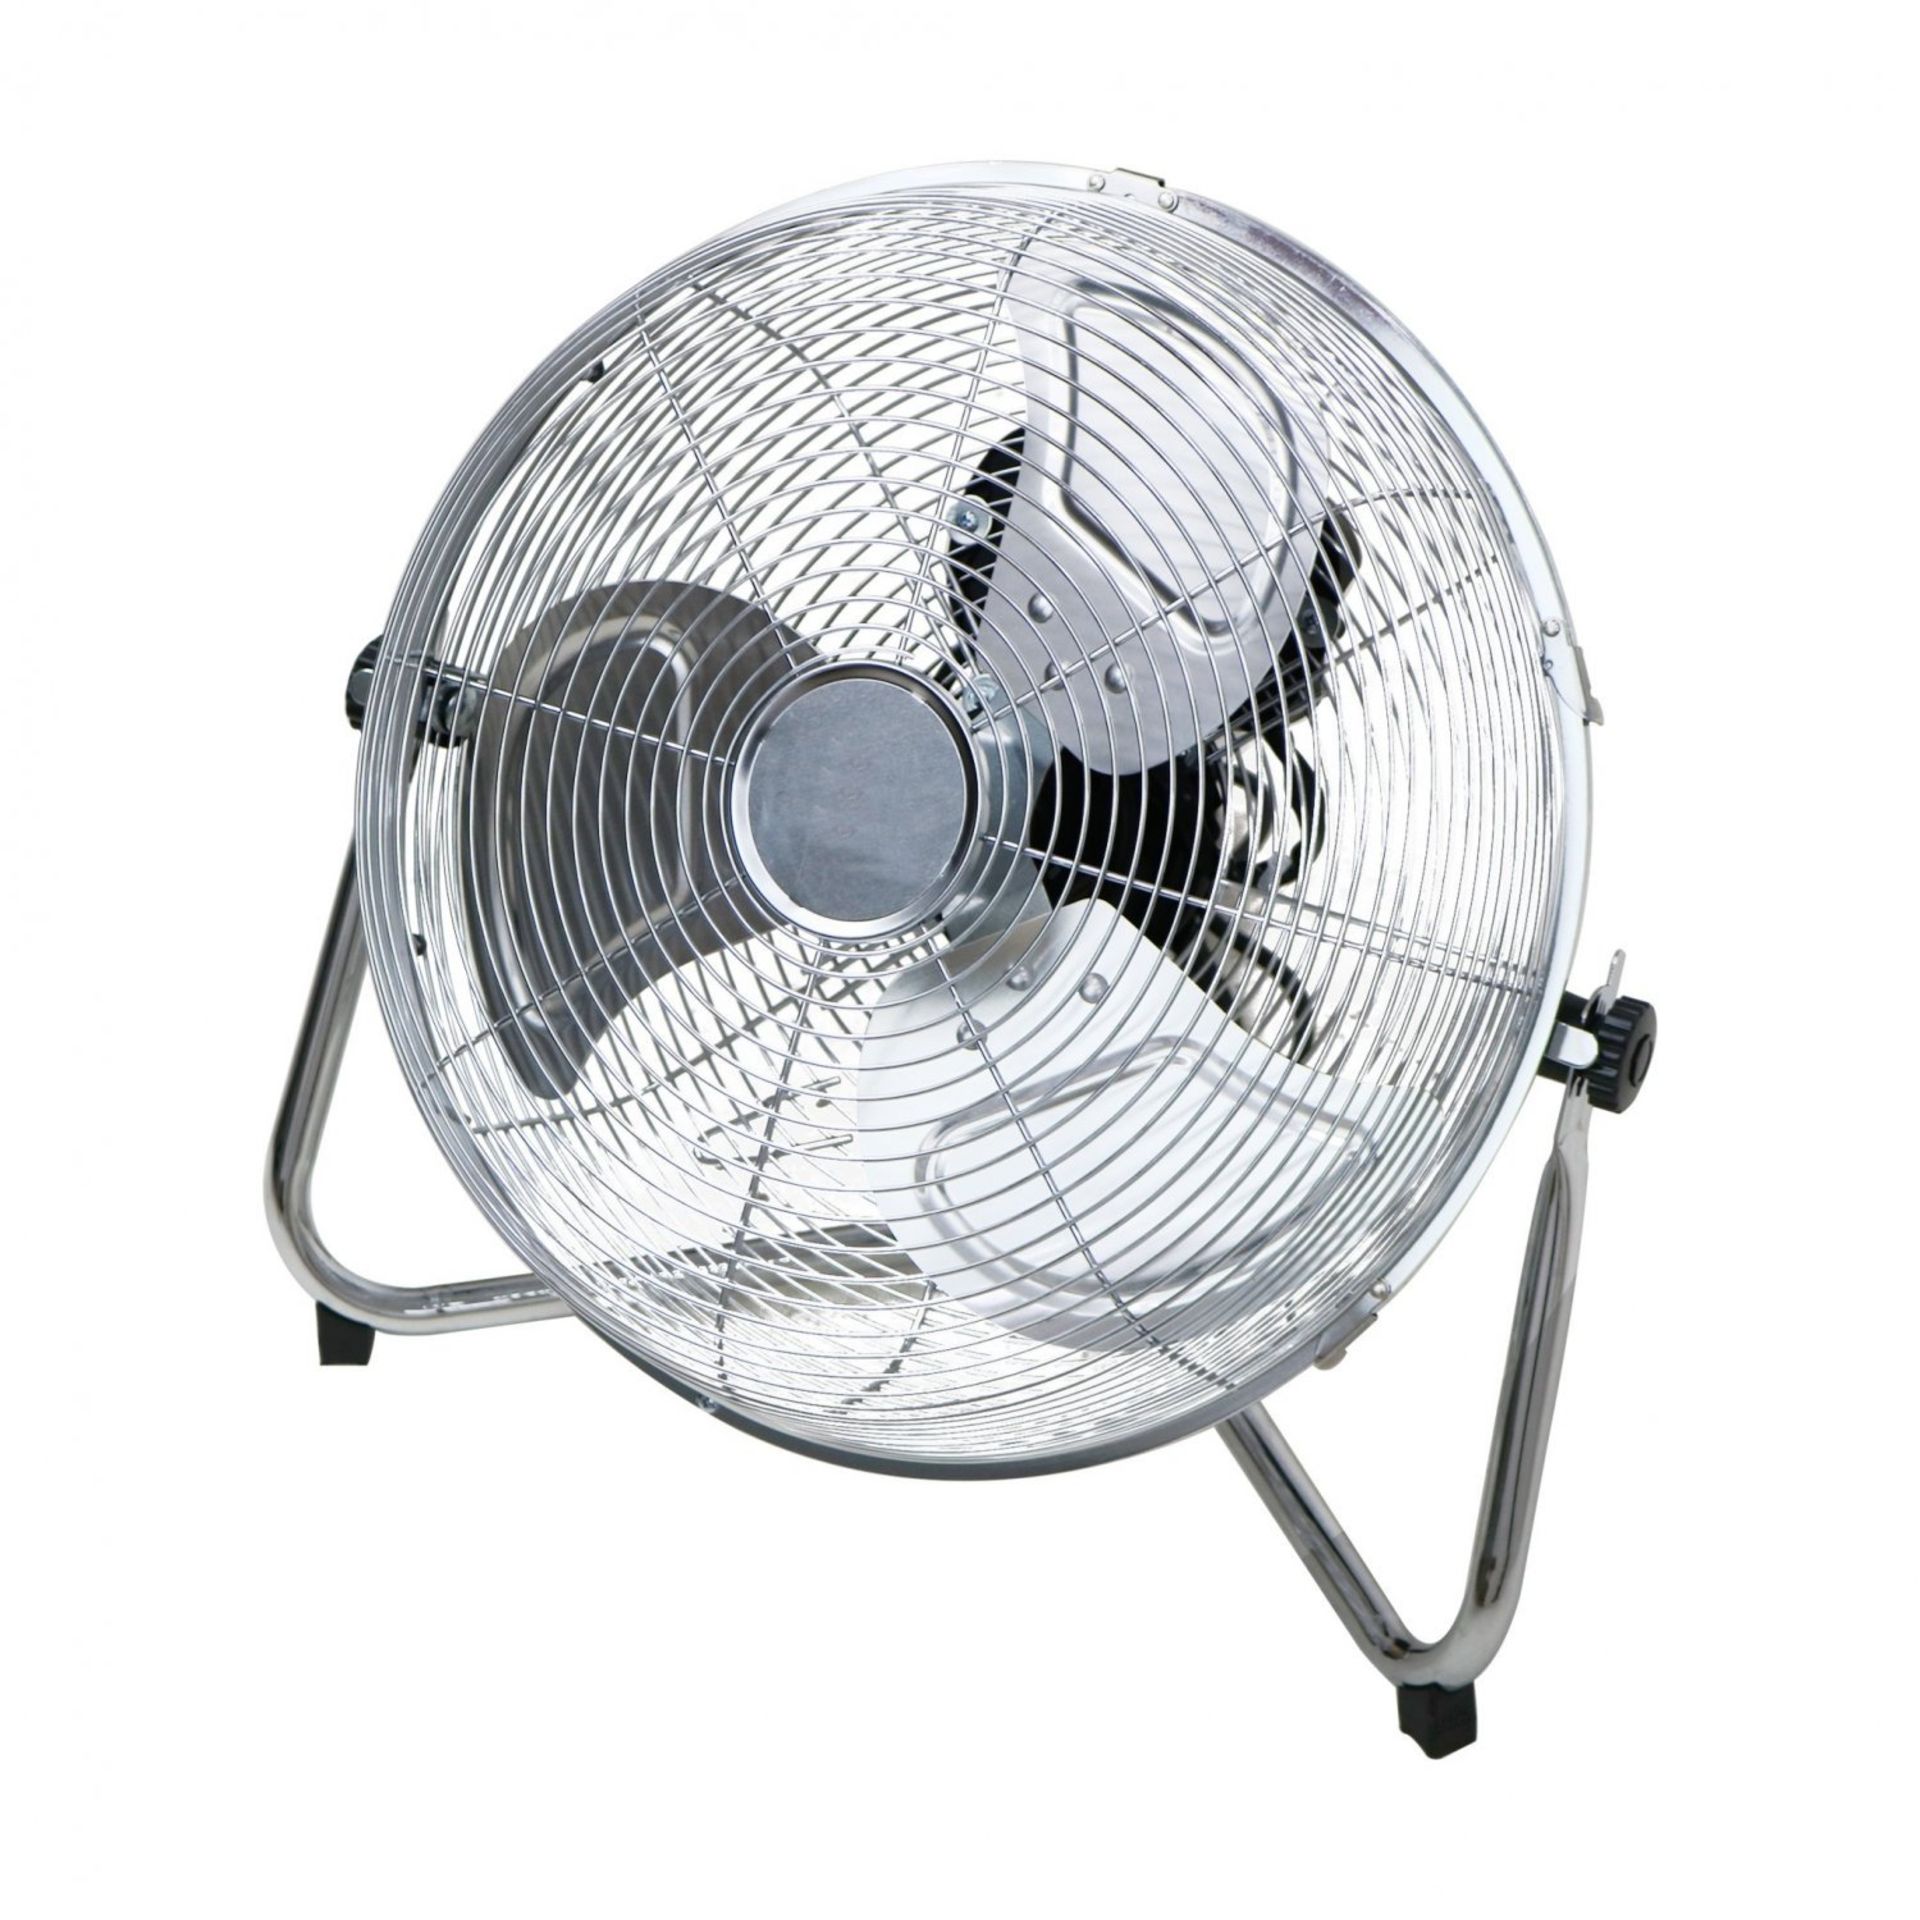 (LF11) 12" Inch Chrome 3 Speed Floor Standing Gym Fan Hydroponic Stay cool this year with th... - Image 2 of 2